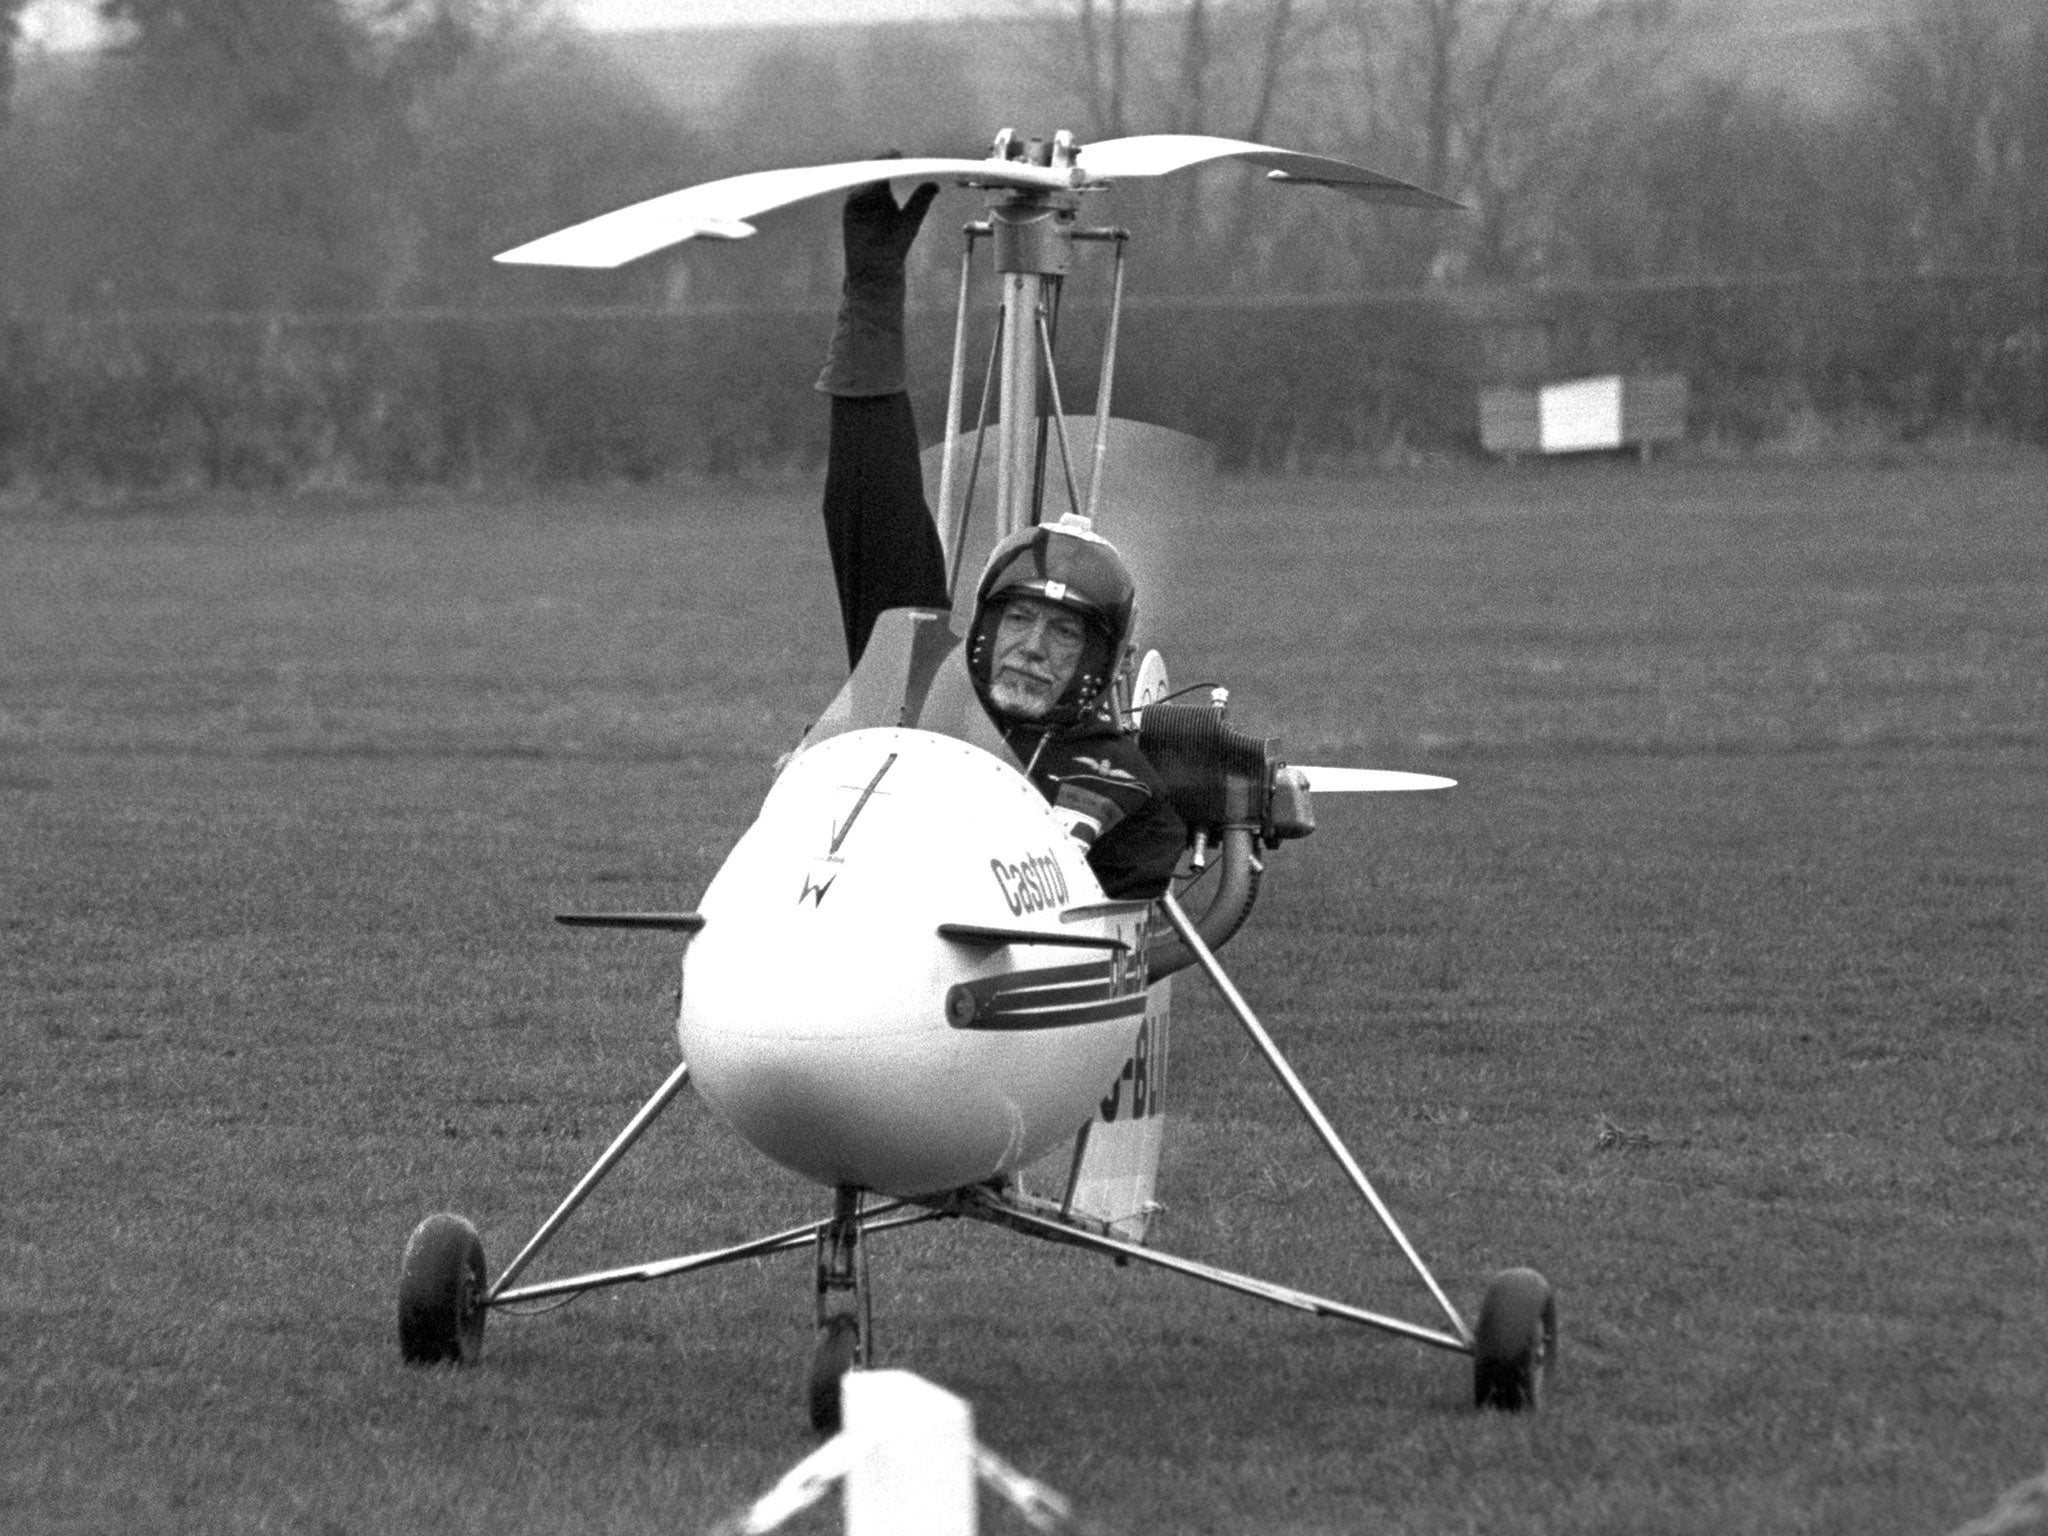 Wallis in one of his autogyros in 1986; he broke 34 flying records